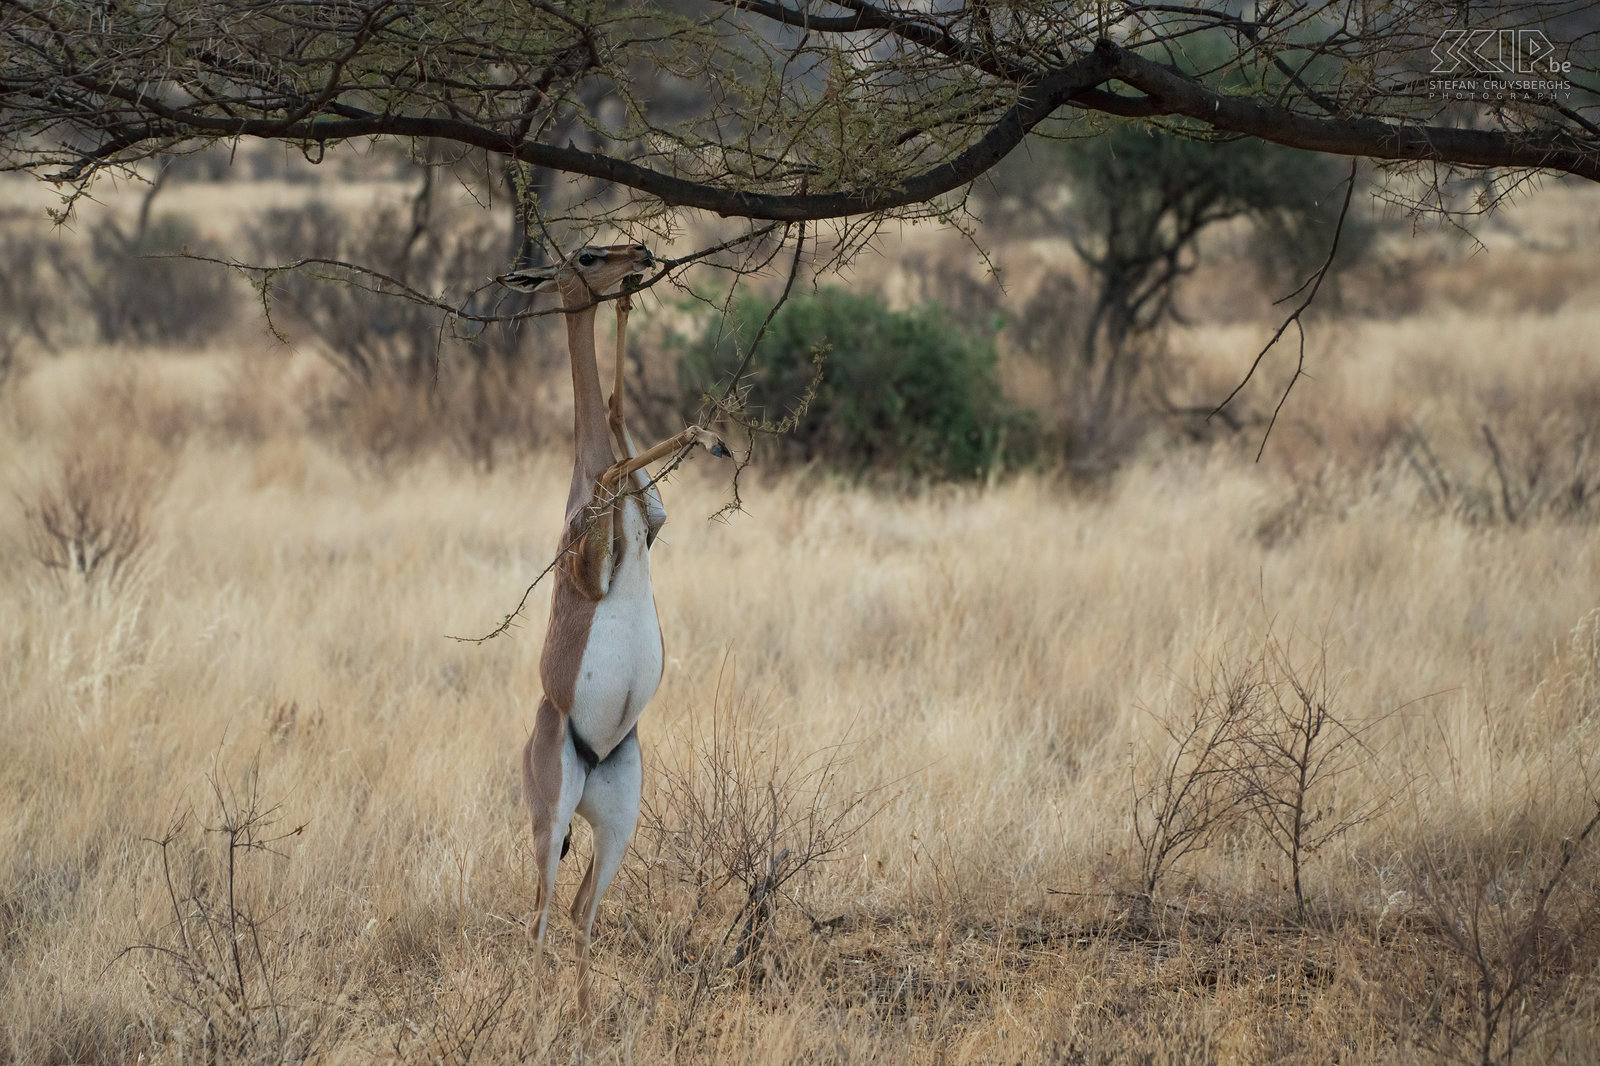 Samburu - Gerenuk The gerenuk, also called Waller's gazelle or Giraffe gazelle (Litocranius walleri) is a thin and long-necked antelope that eats leaves, branches and twigs from acacias and dry thorn bush scrubs. These gazelles can only found in northern Kenya. Stefan Cruysberghs